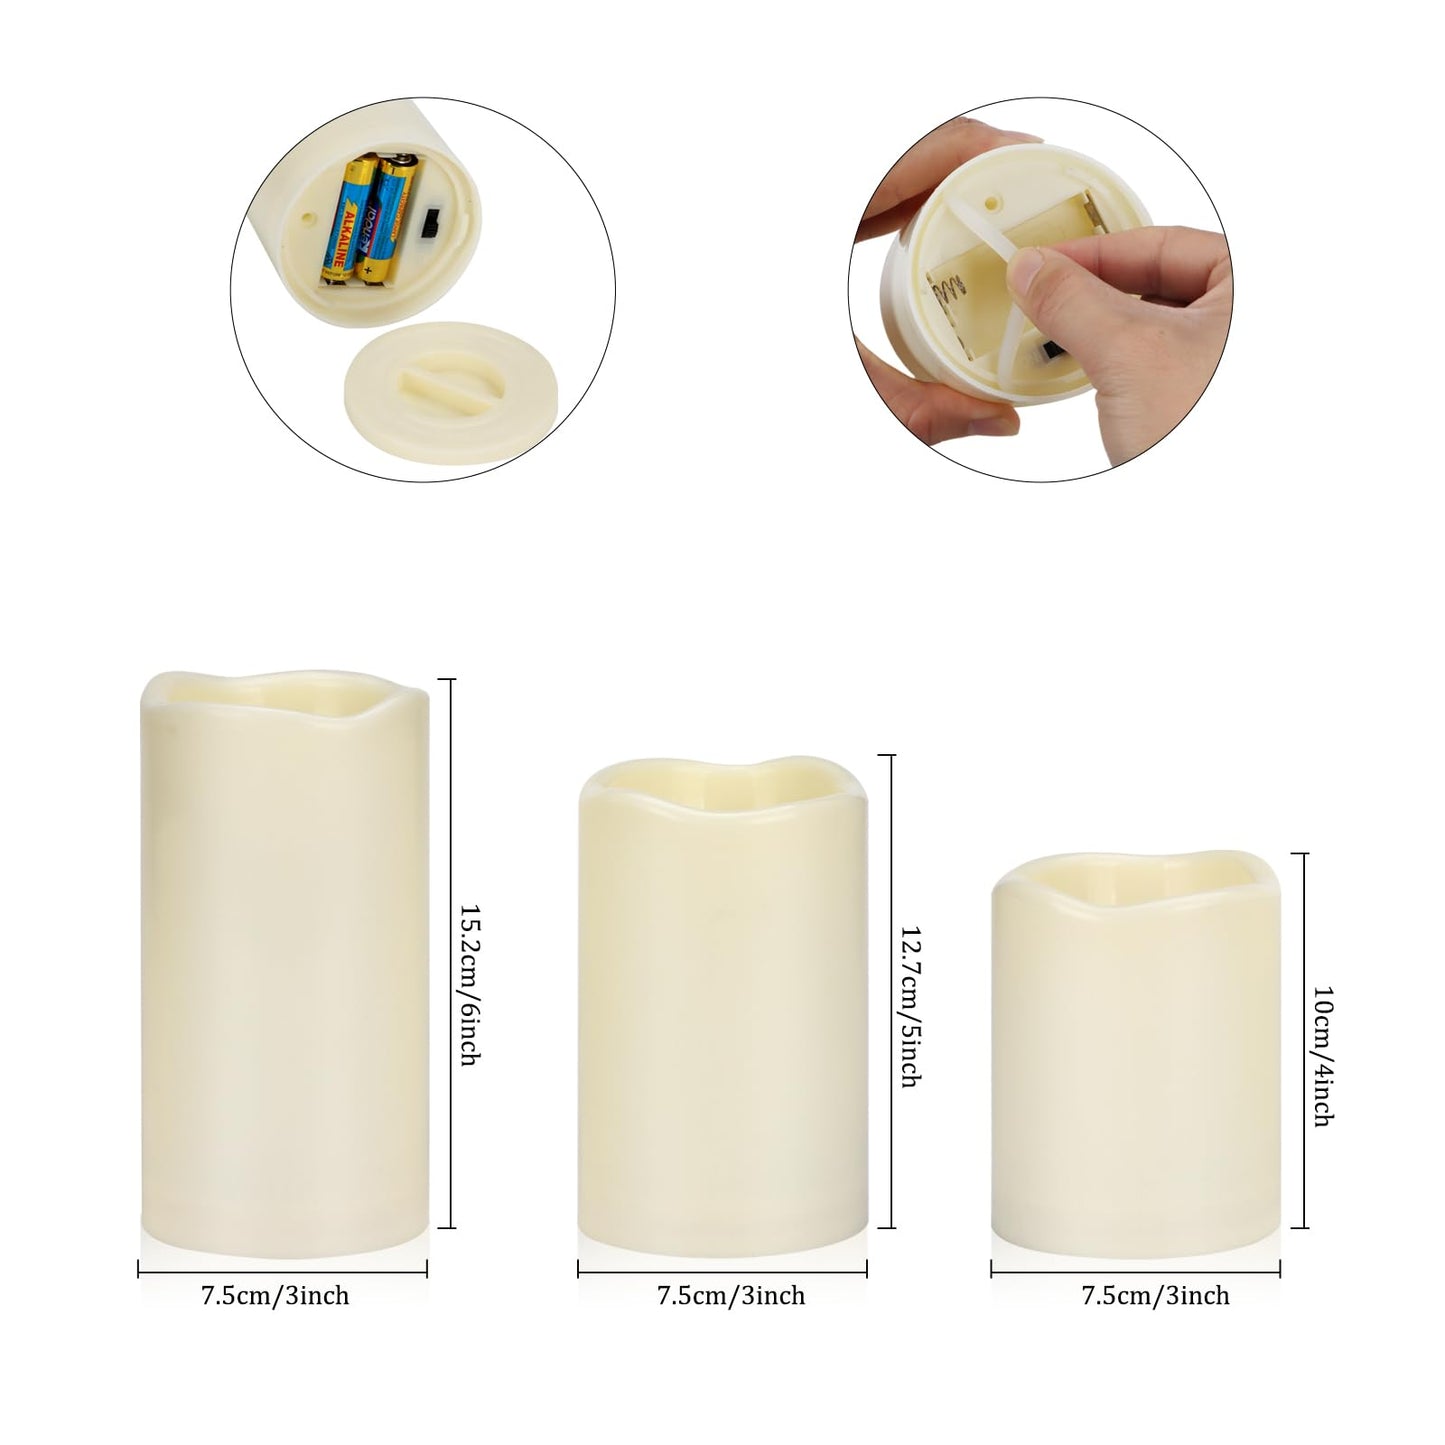 Artmarry Flameless Candles 4" 5" 6" Set of 3 Ivory Outdoor Indoor Pillars 3" Diameter Battery Operated Flickering Candles Include 10-Key Remote Timer Function 400+ Hours by 2 AA Batteries